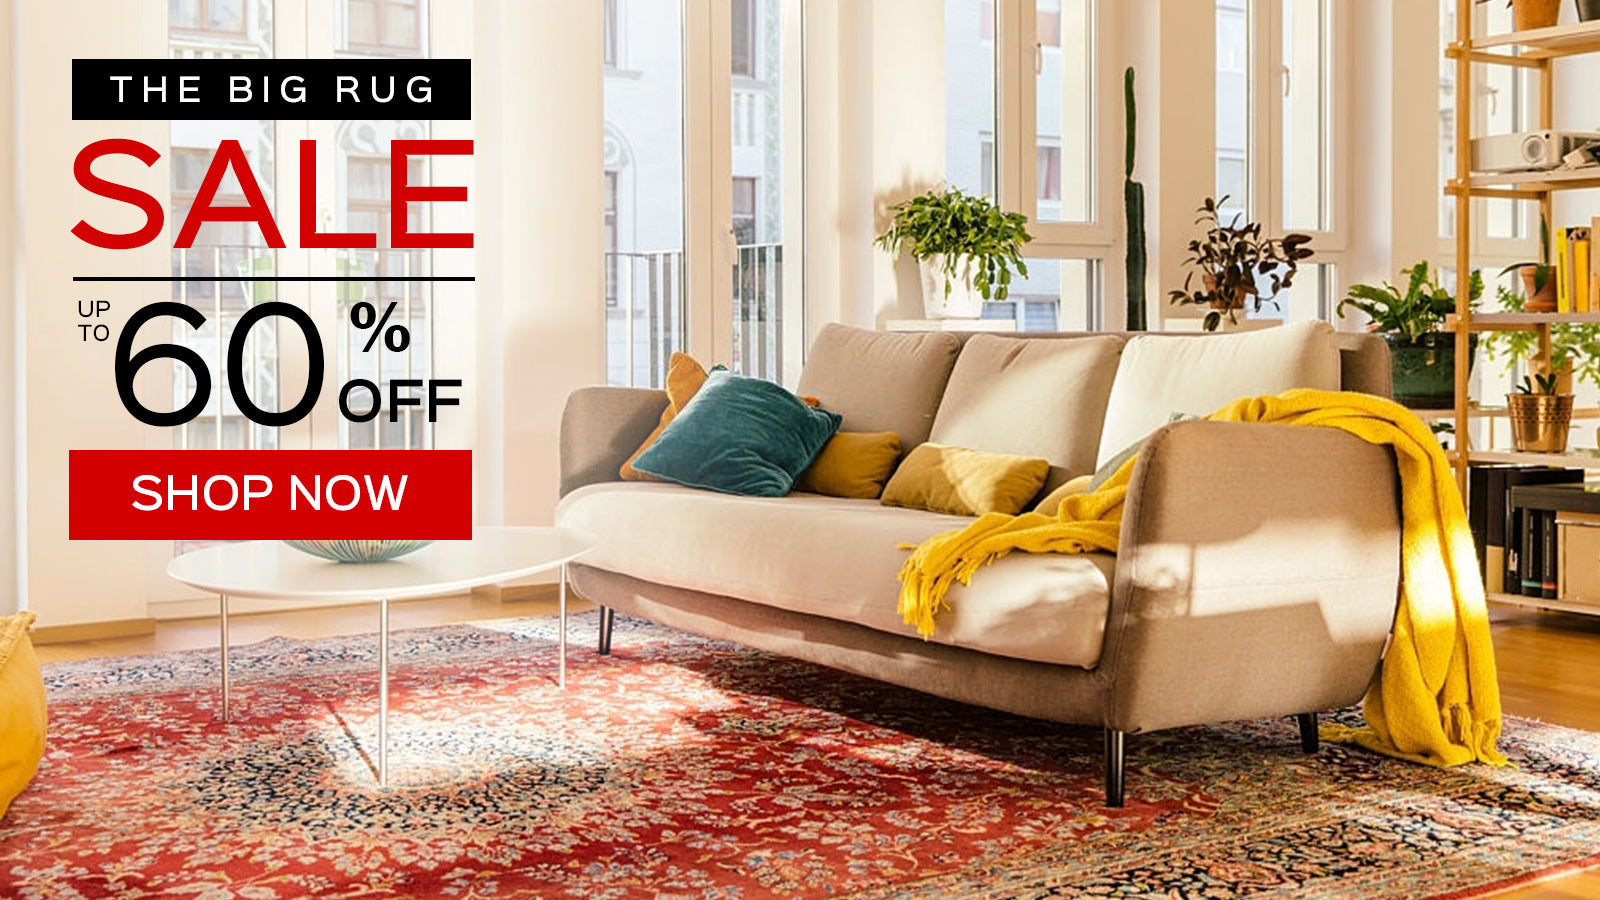 Red Persian Rug | The Big Rug Sale | 60% OFF